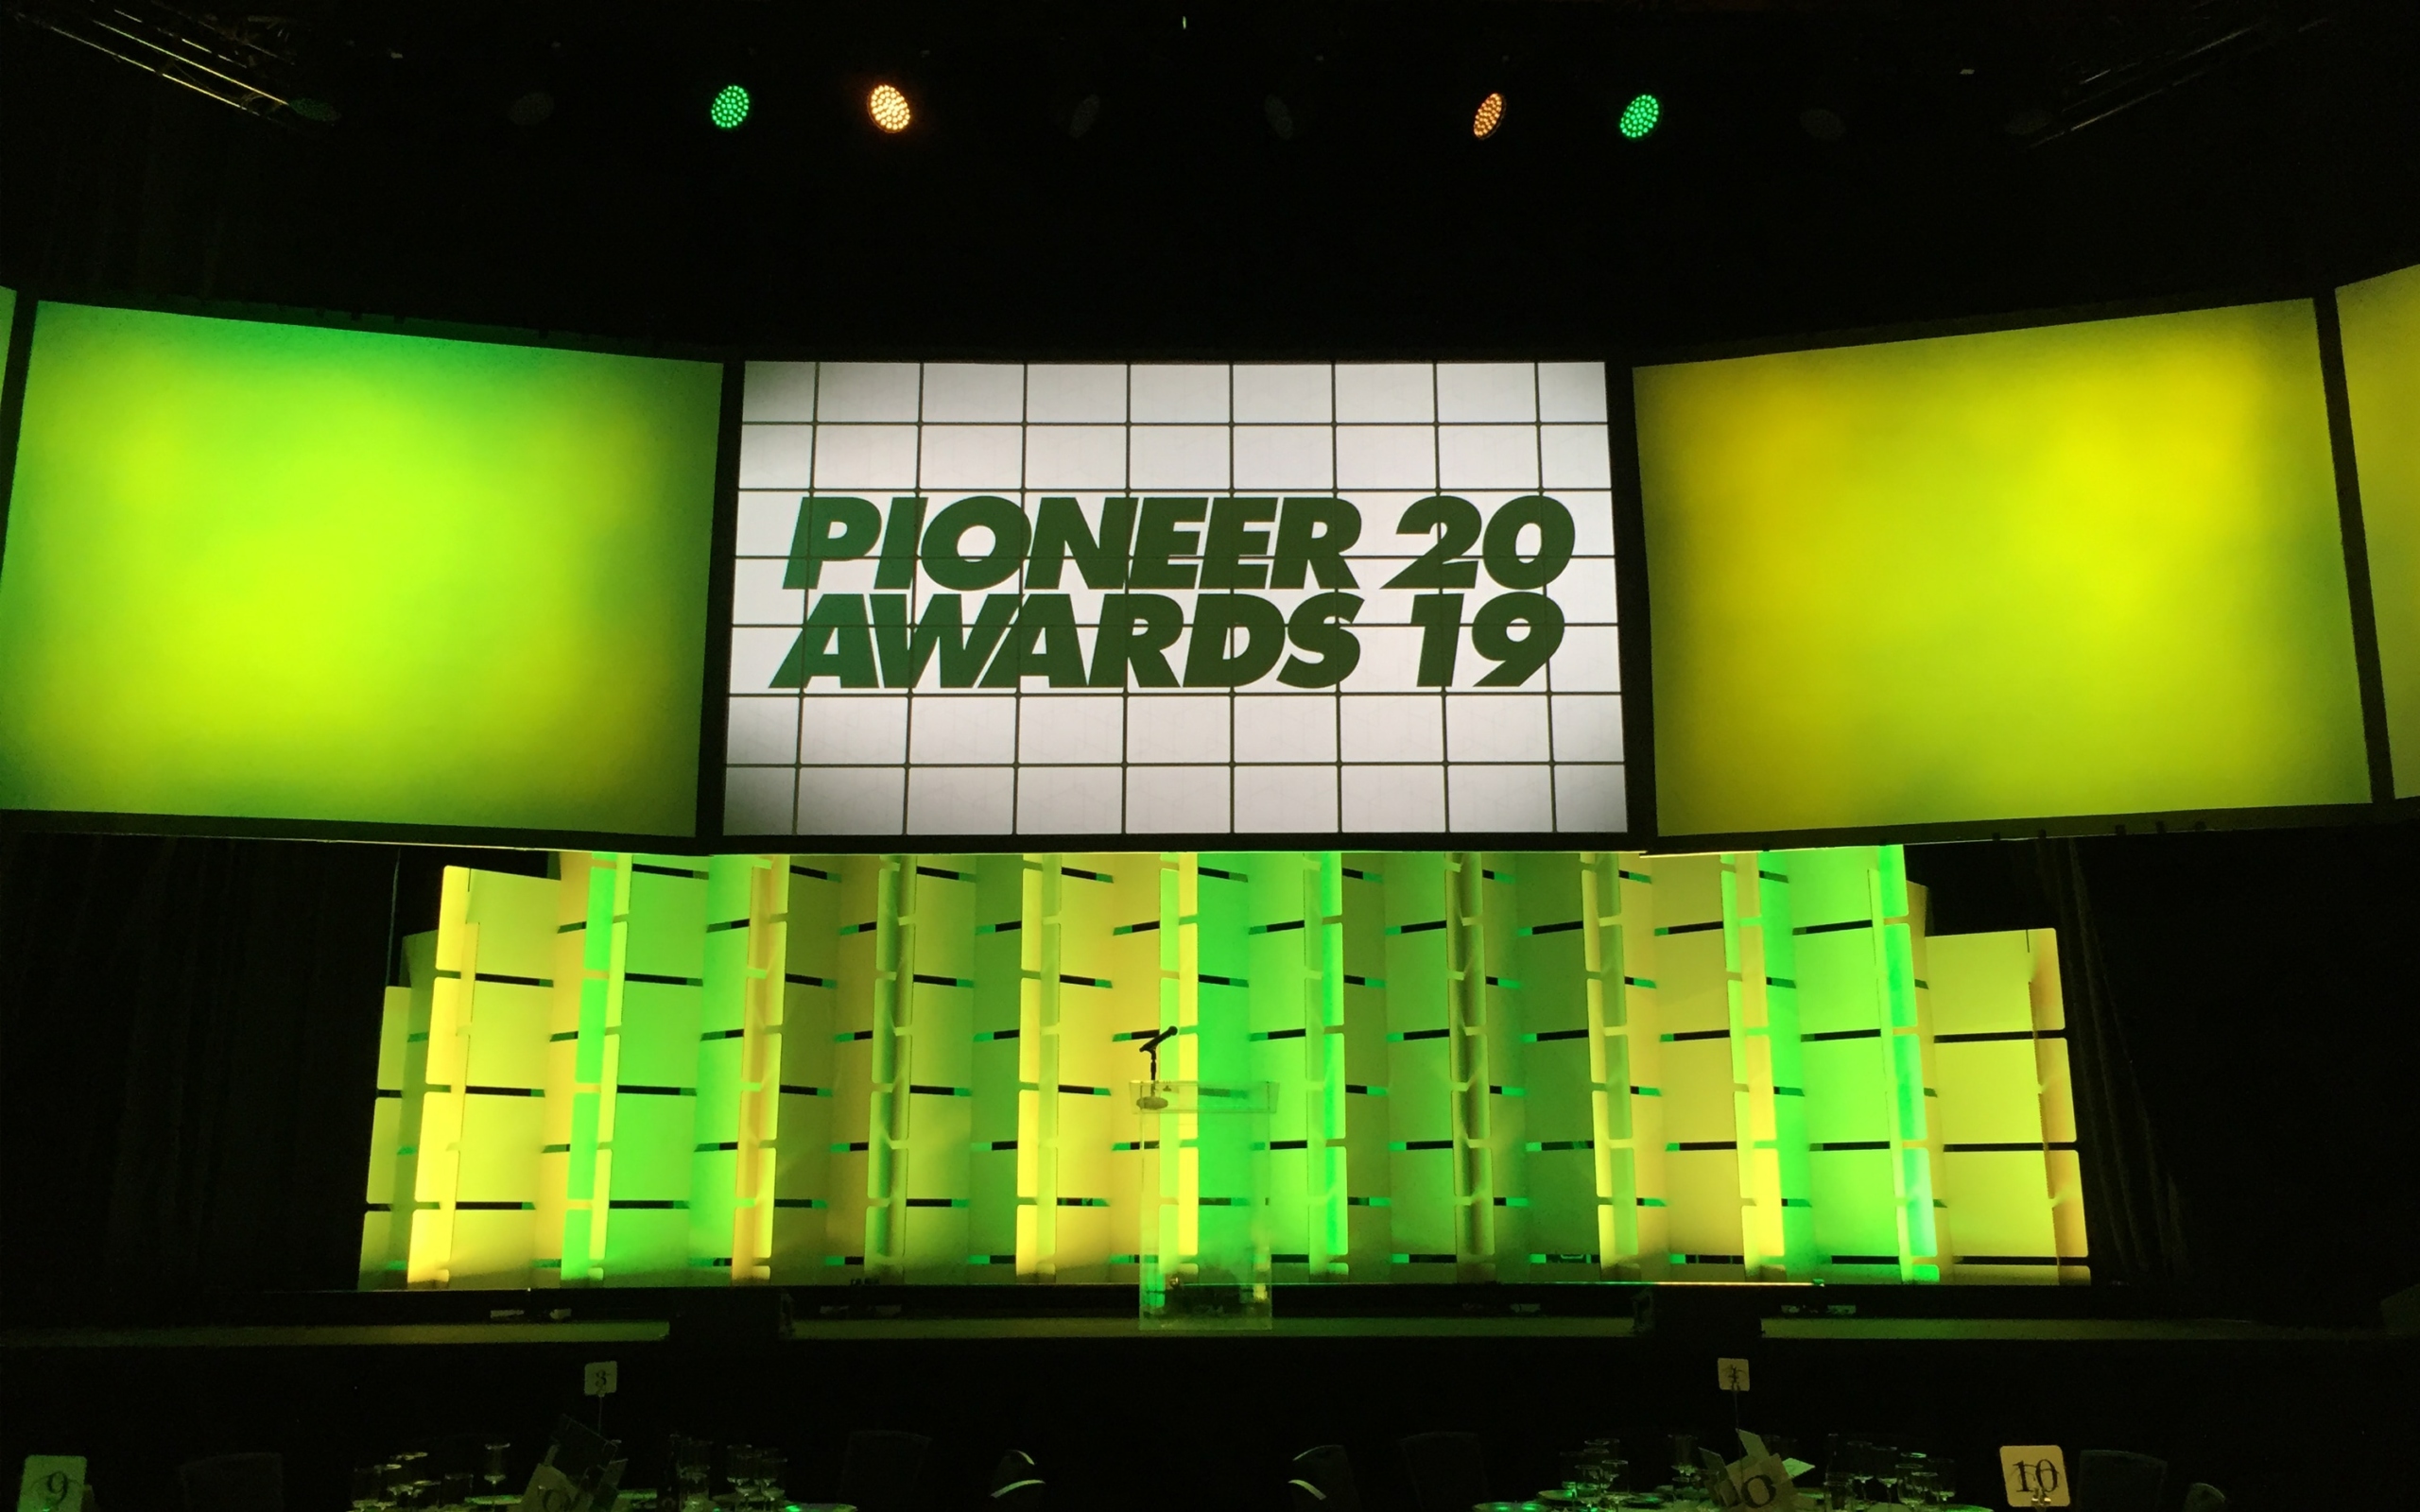 UofO Pioneer Awards Stage Backdrop